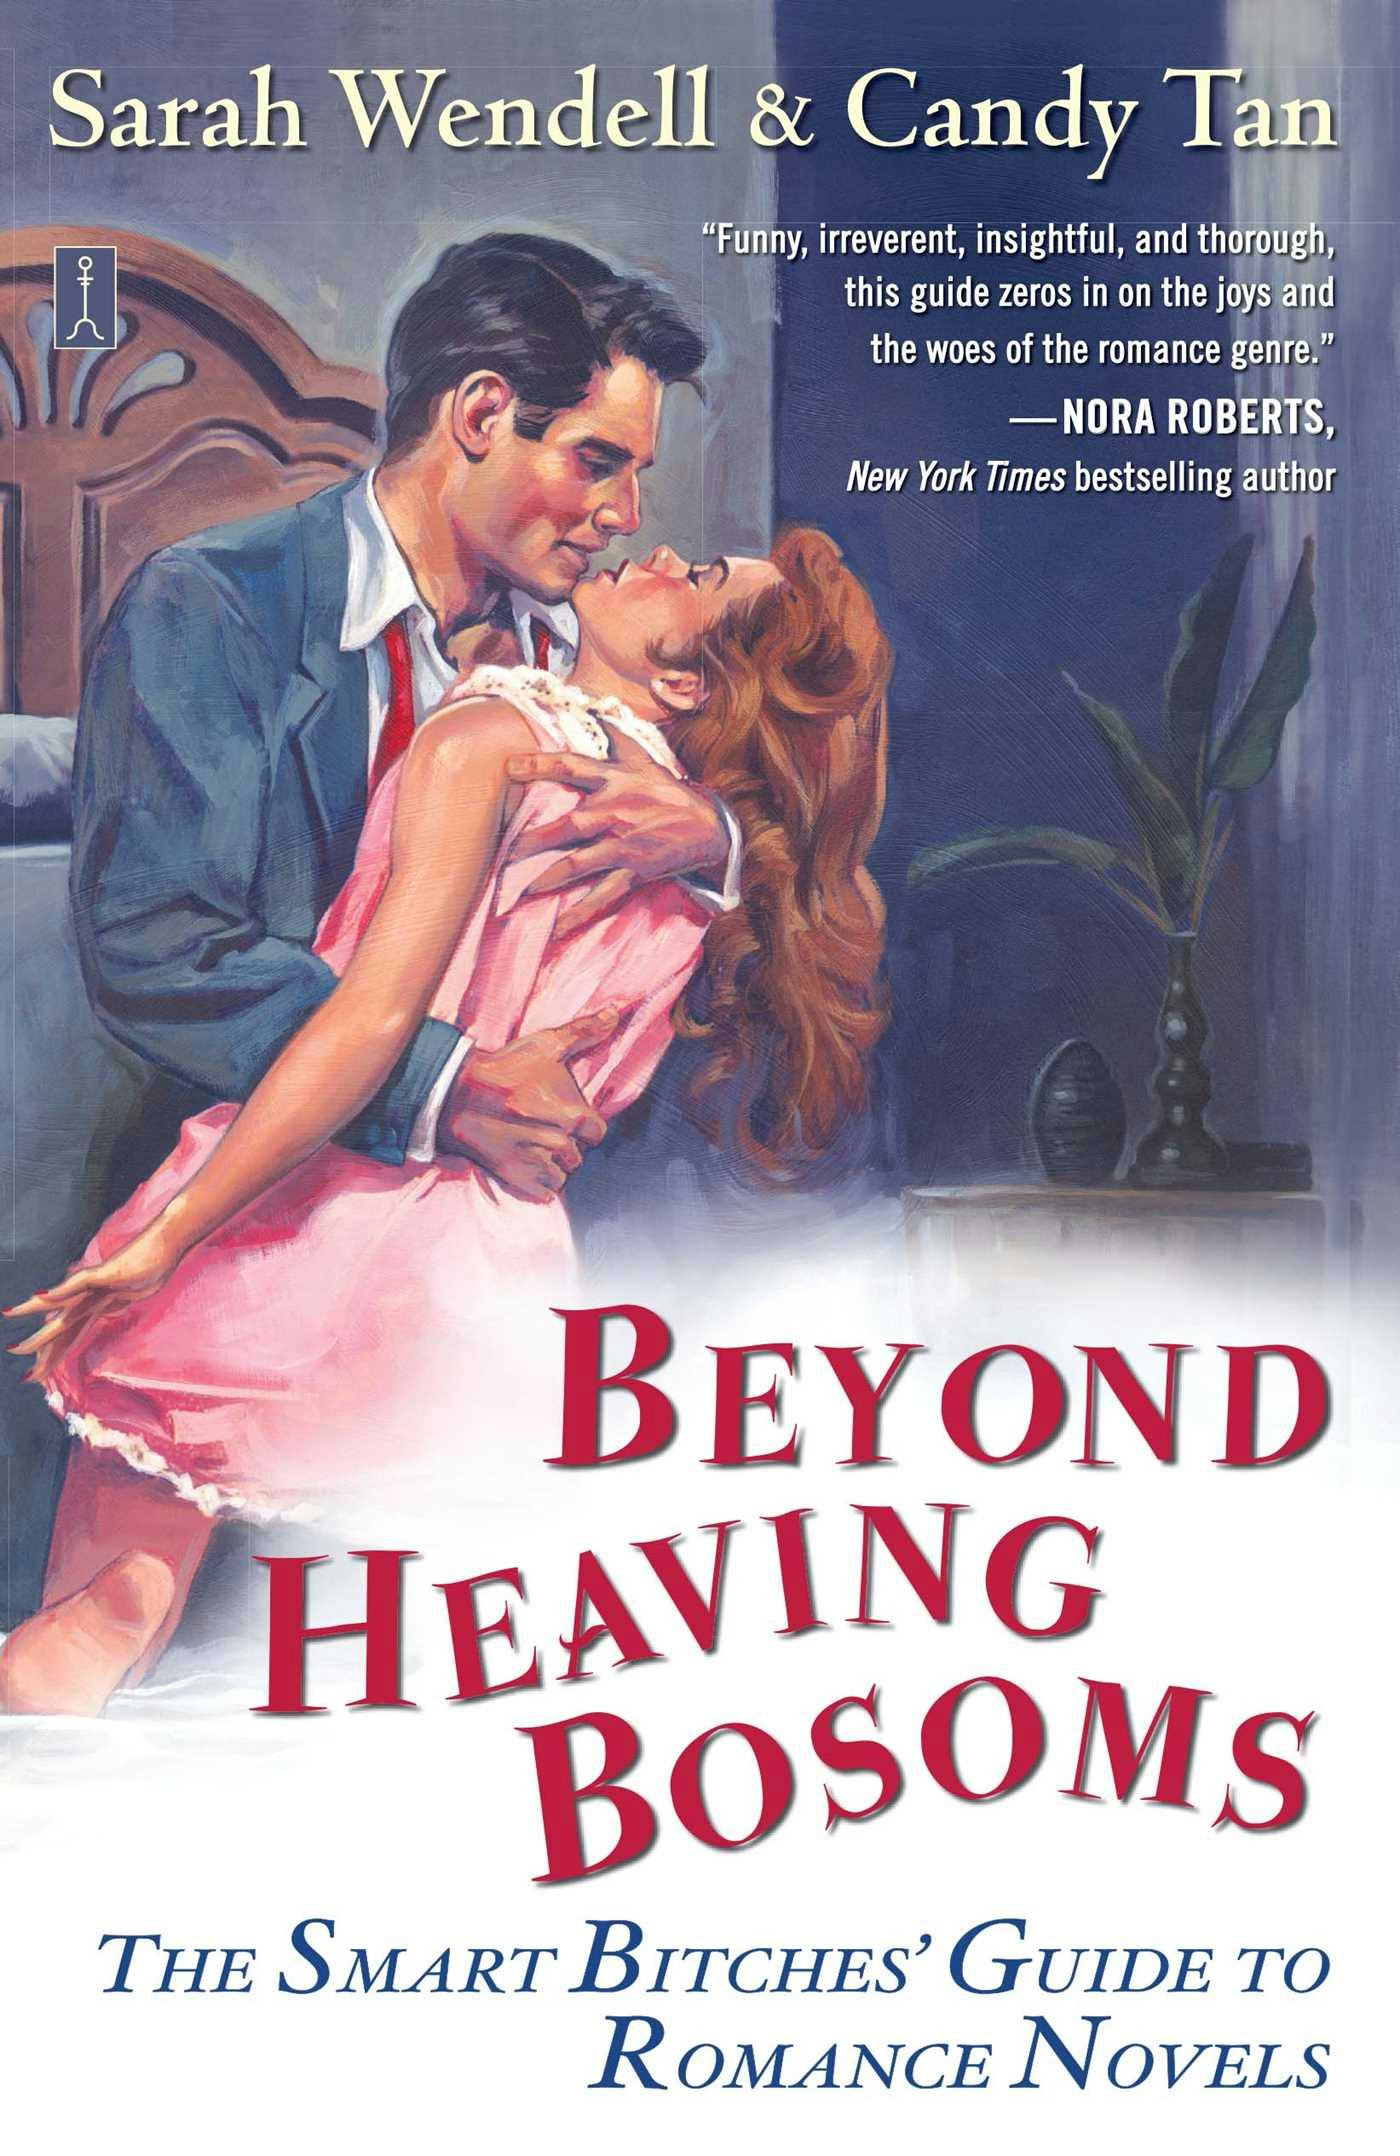 Beyond Heaving Bosoms: The Smart Bitches' Guide to Romance Novels - Candy Tan, Sarah Wendell